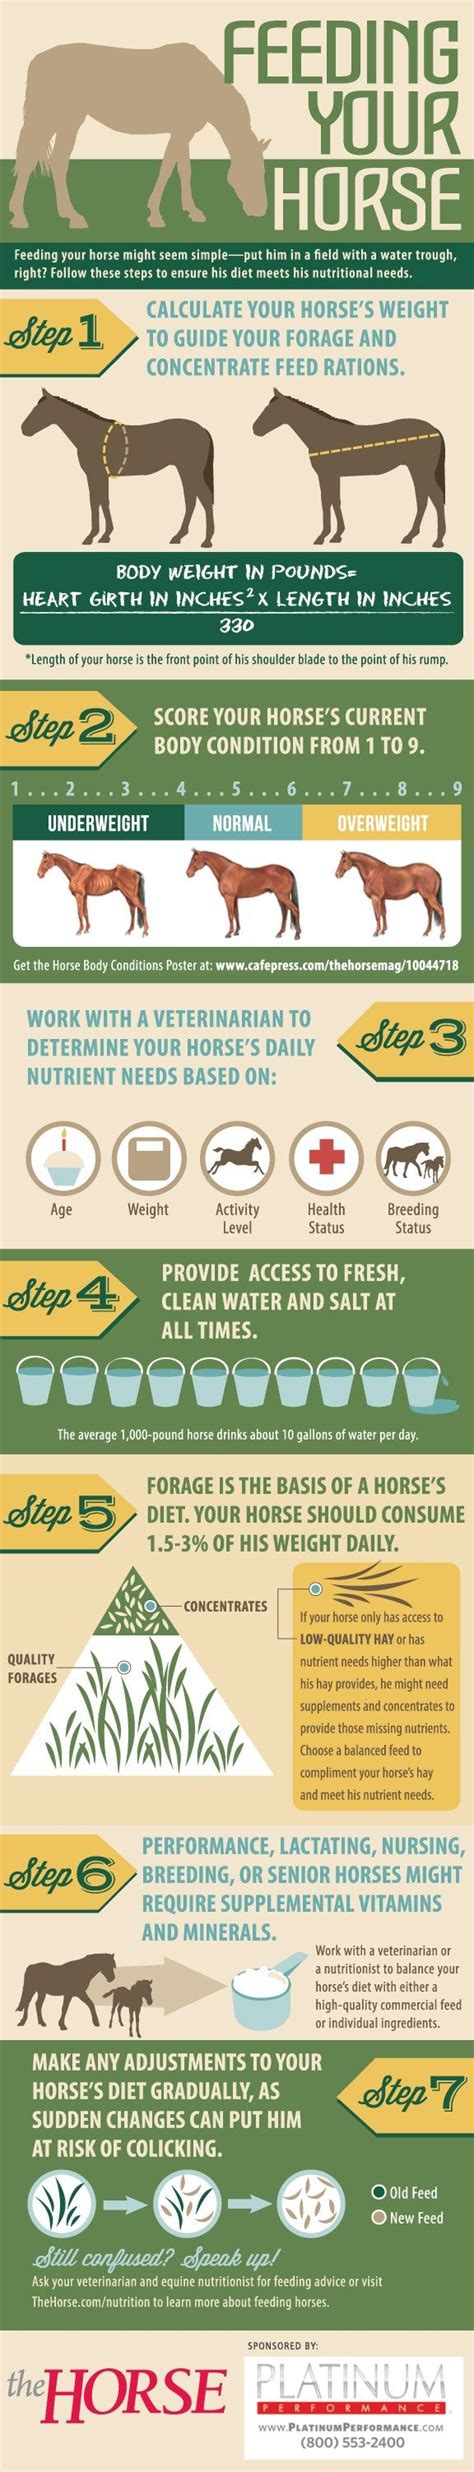 Infographic Feeding Your Horse Equine Nutrition Horse Care Healthy